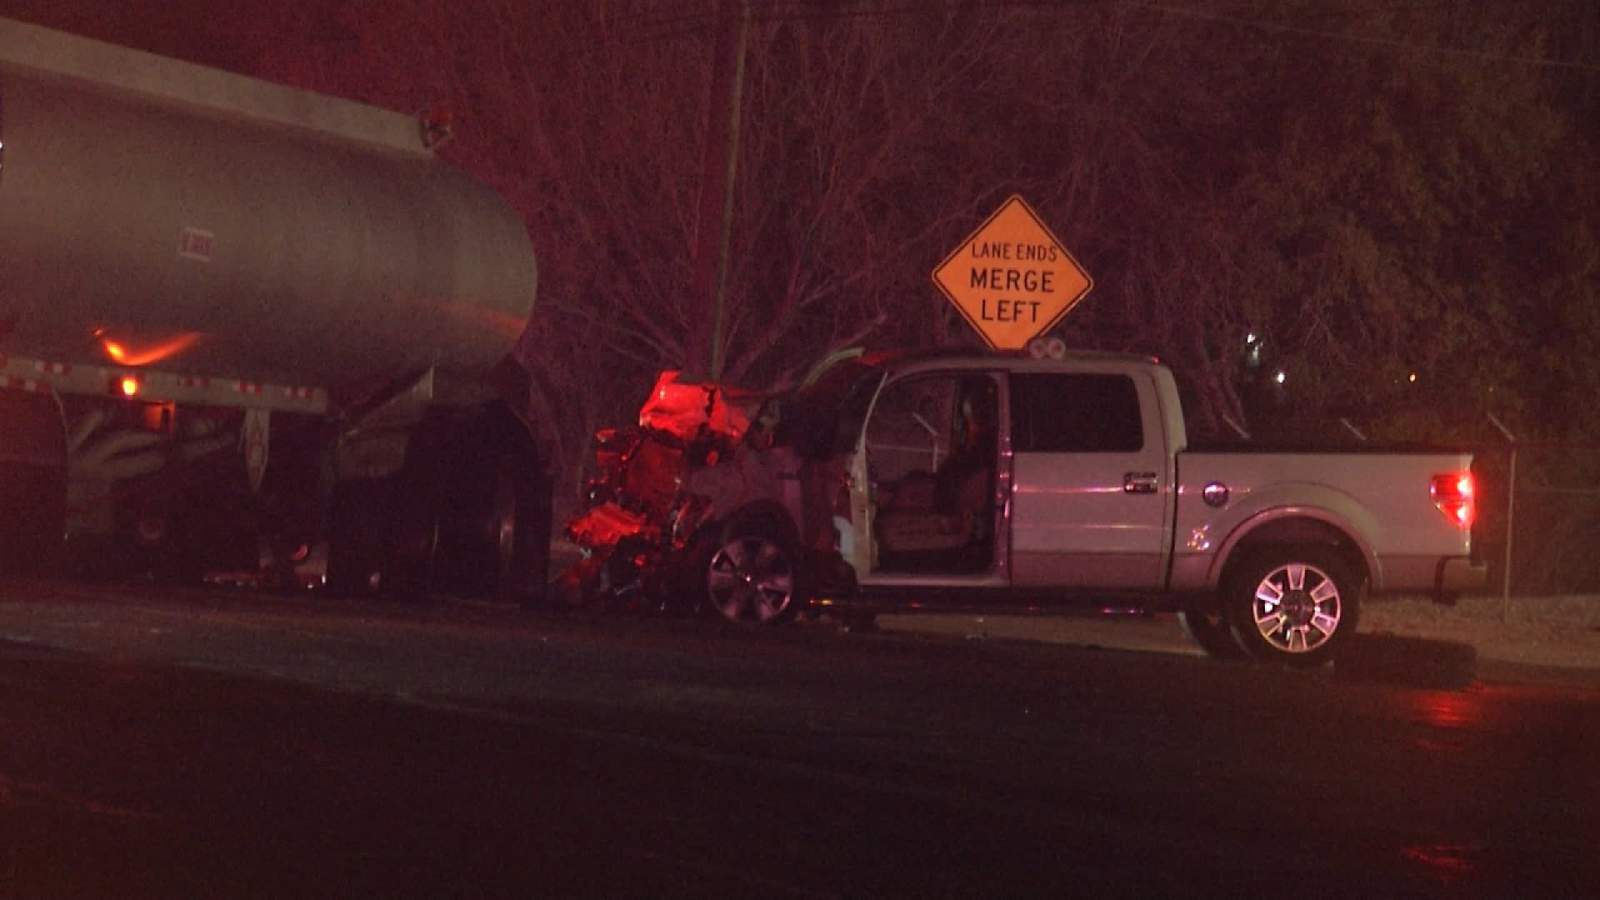 Driver extracted from vehicle after crash into tanker truck dies from injuries, police say